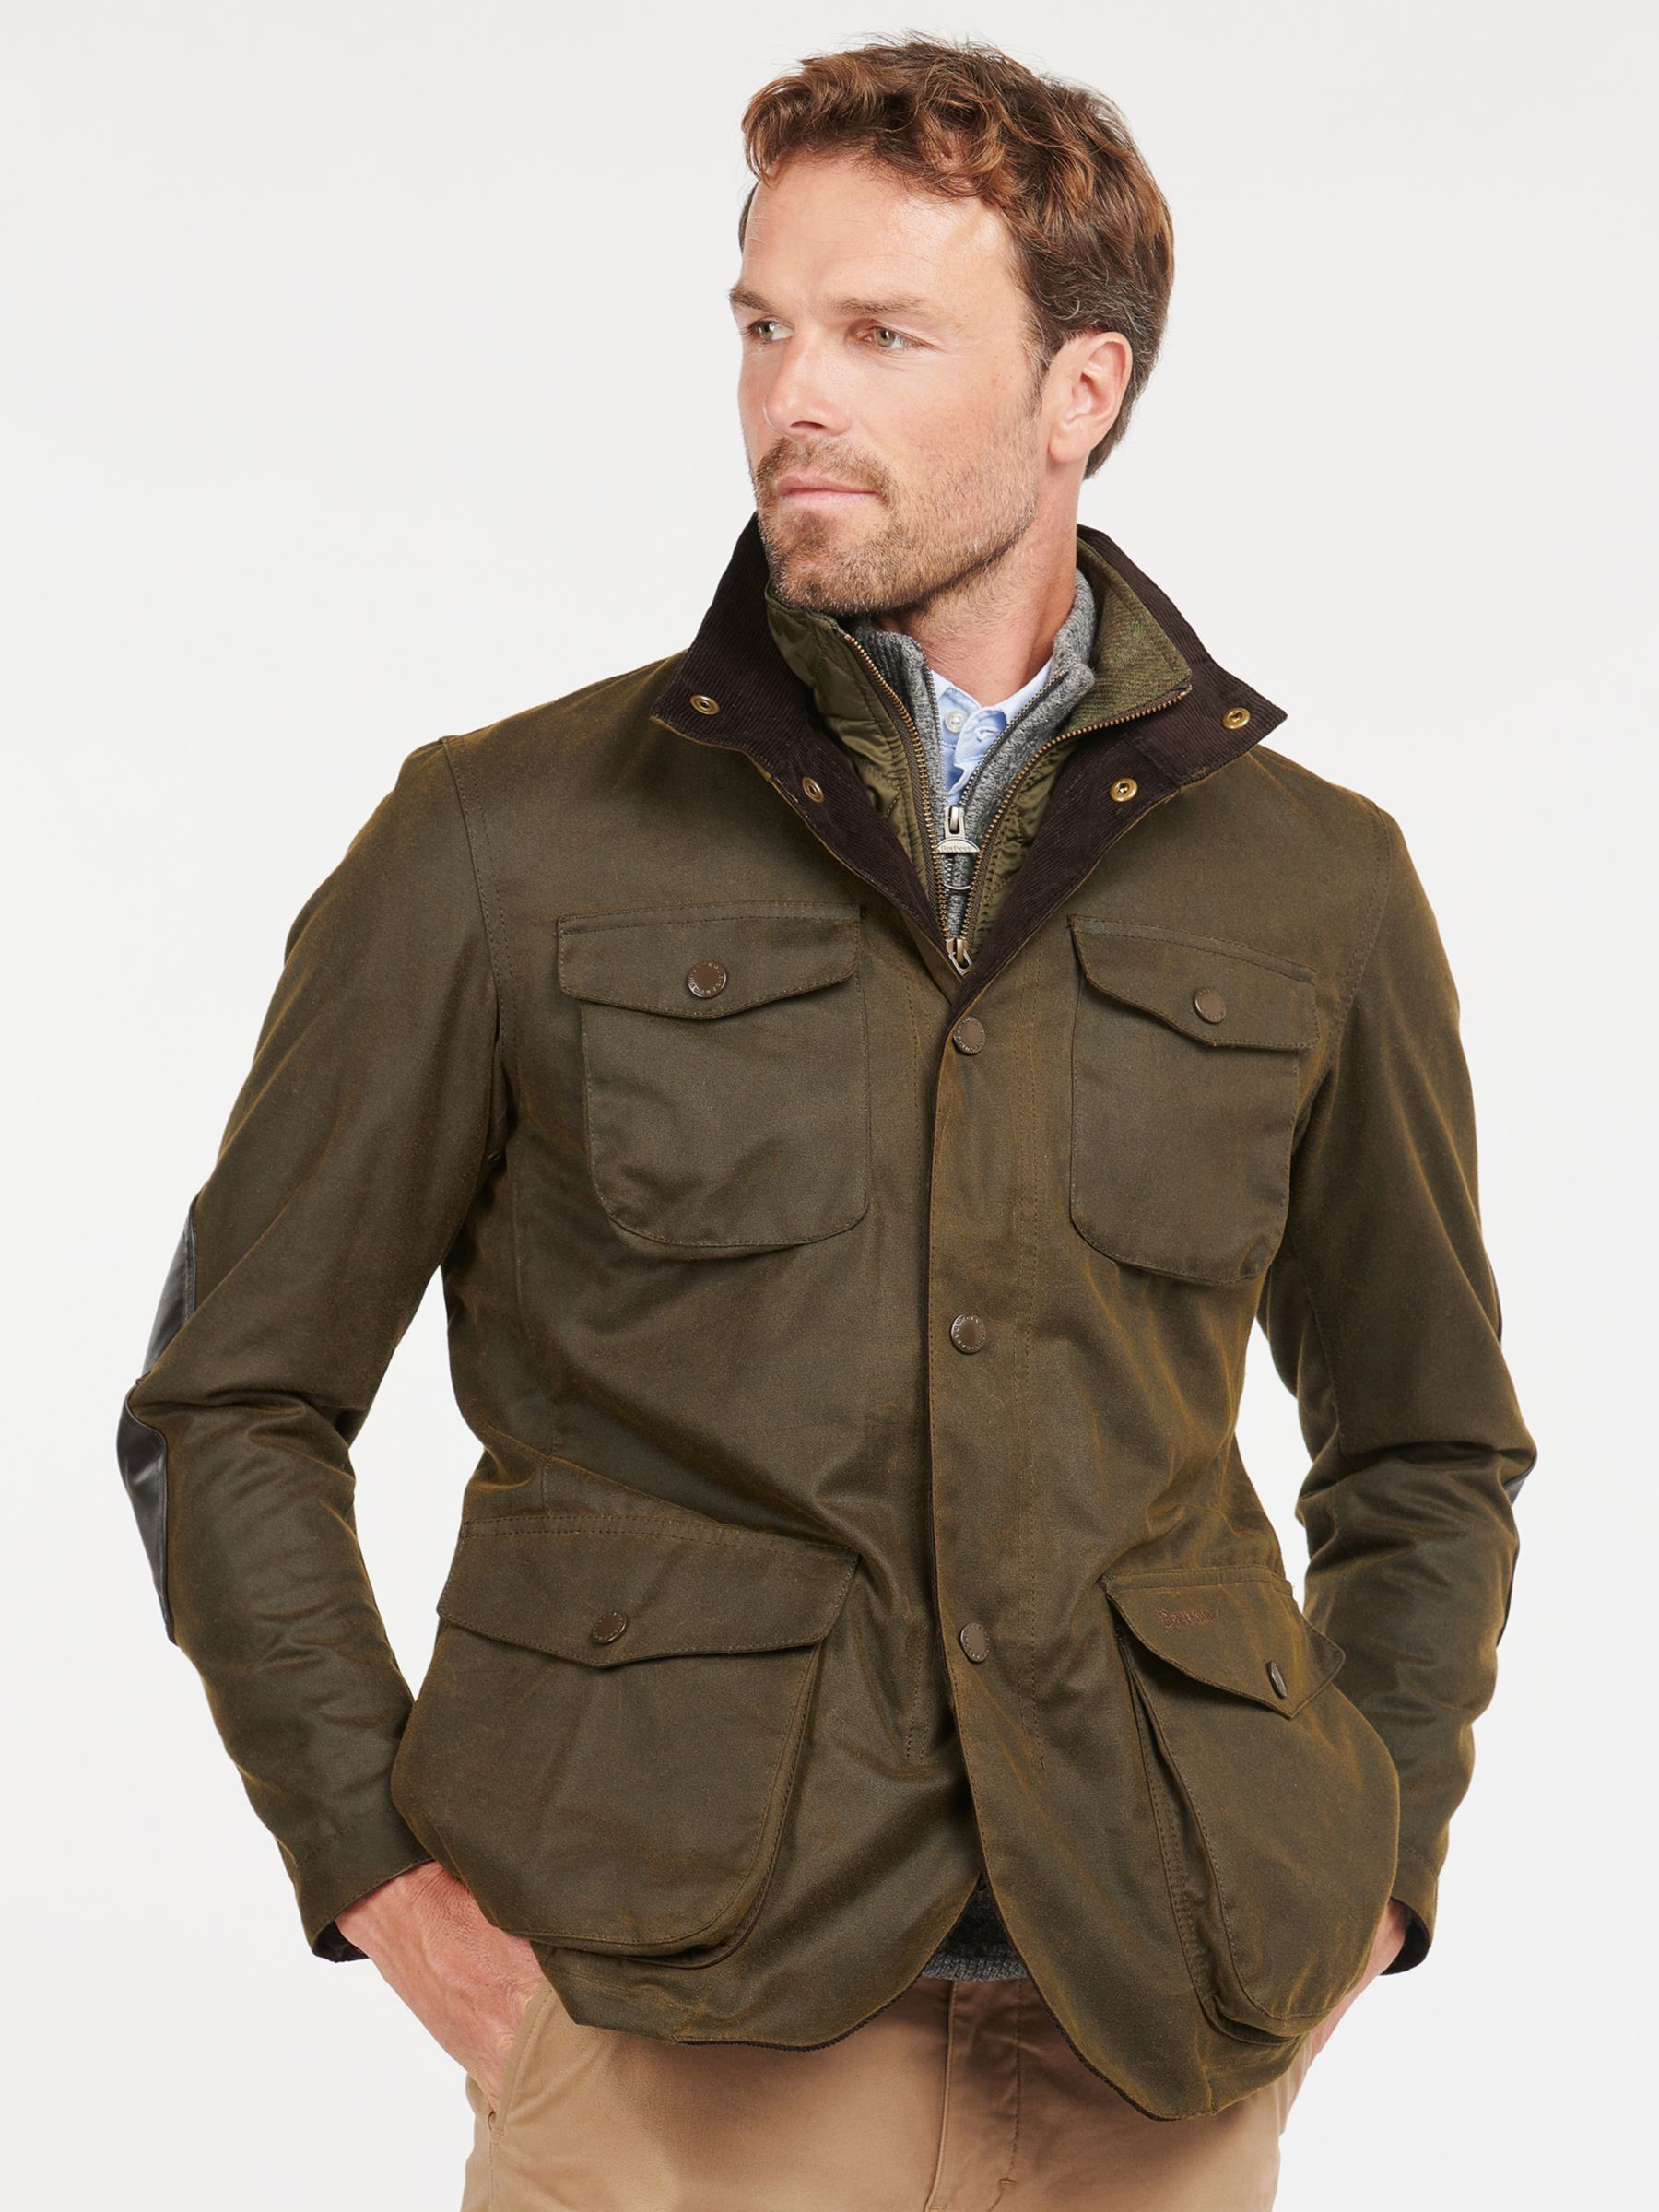 Barbour Ogston Waxed Jacket, Olive at John Lewis & Partners